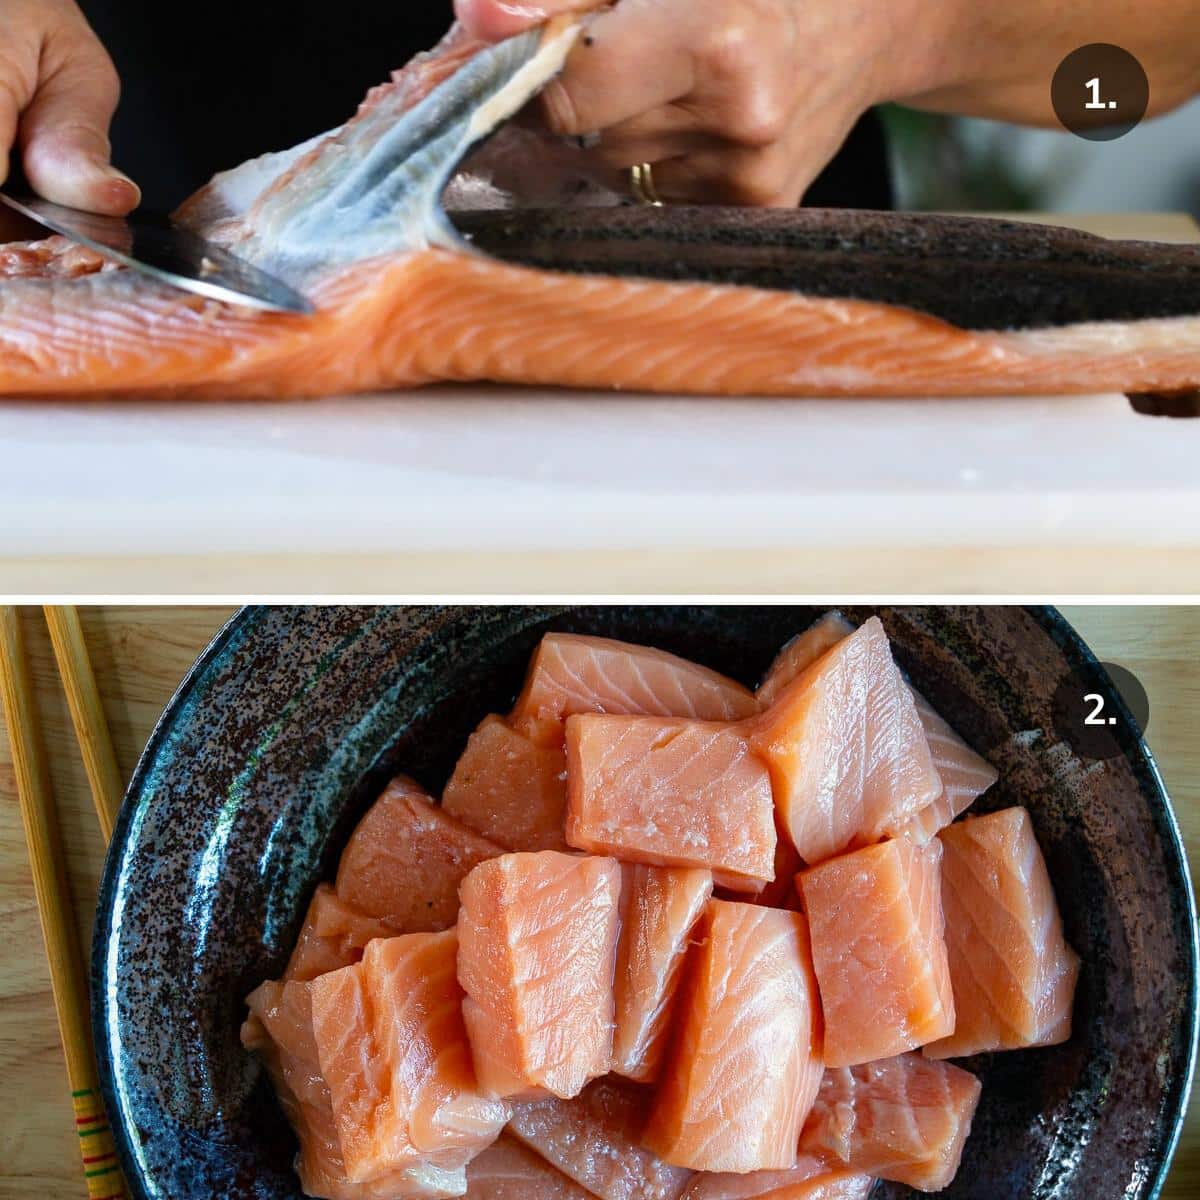 Removing the skin from salmon fillet and cutting the salmon into cubes.